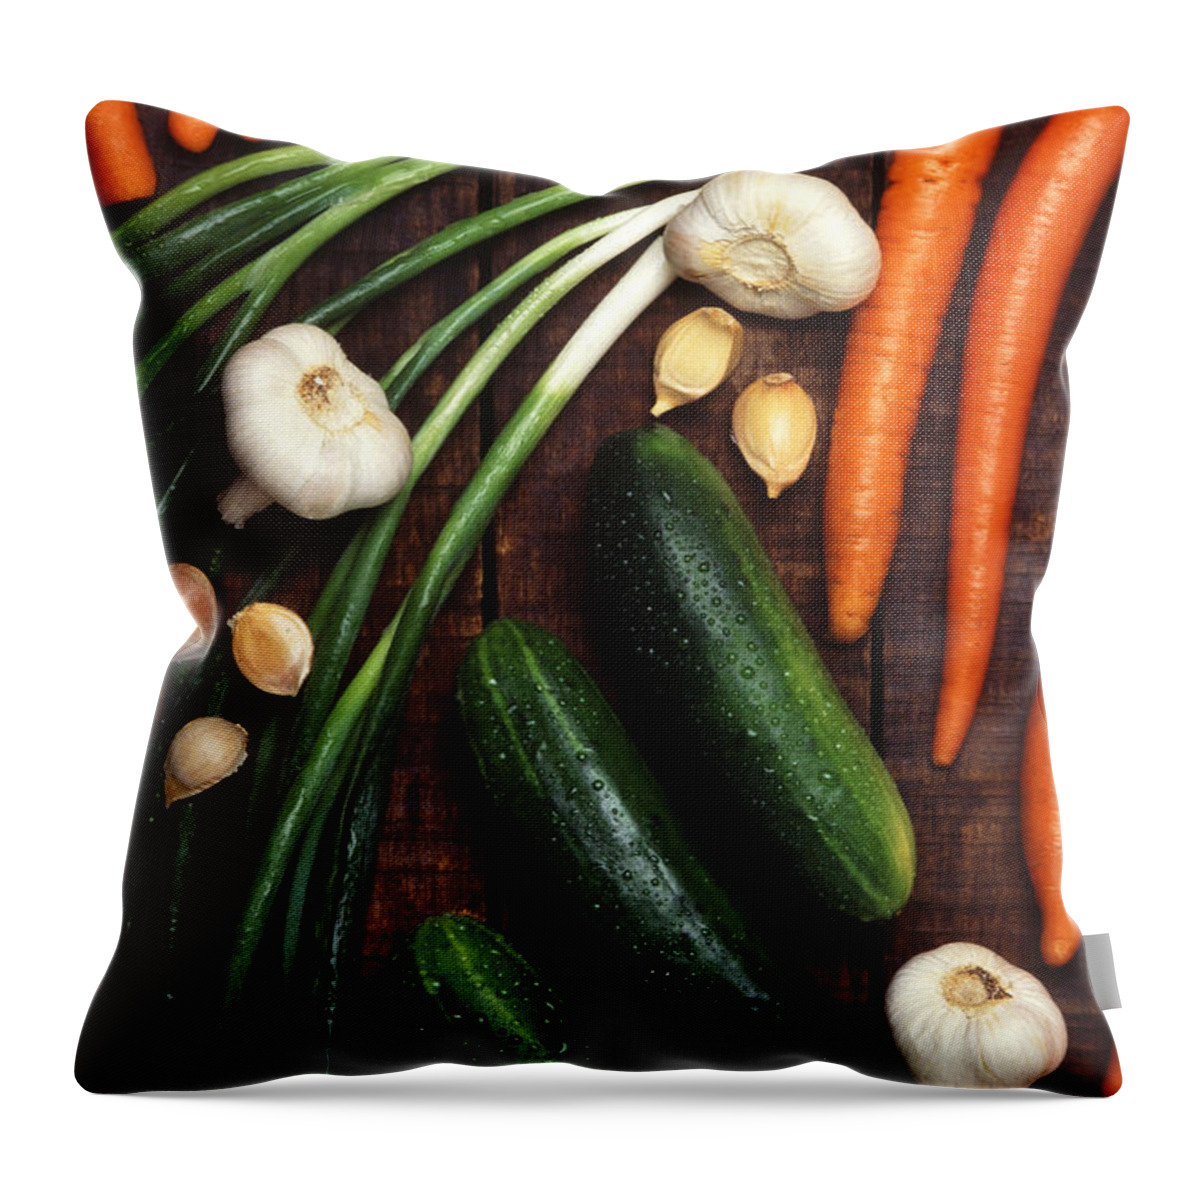 Vegetables Throw Pillow featuring the photograph Vegetables by Science Source